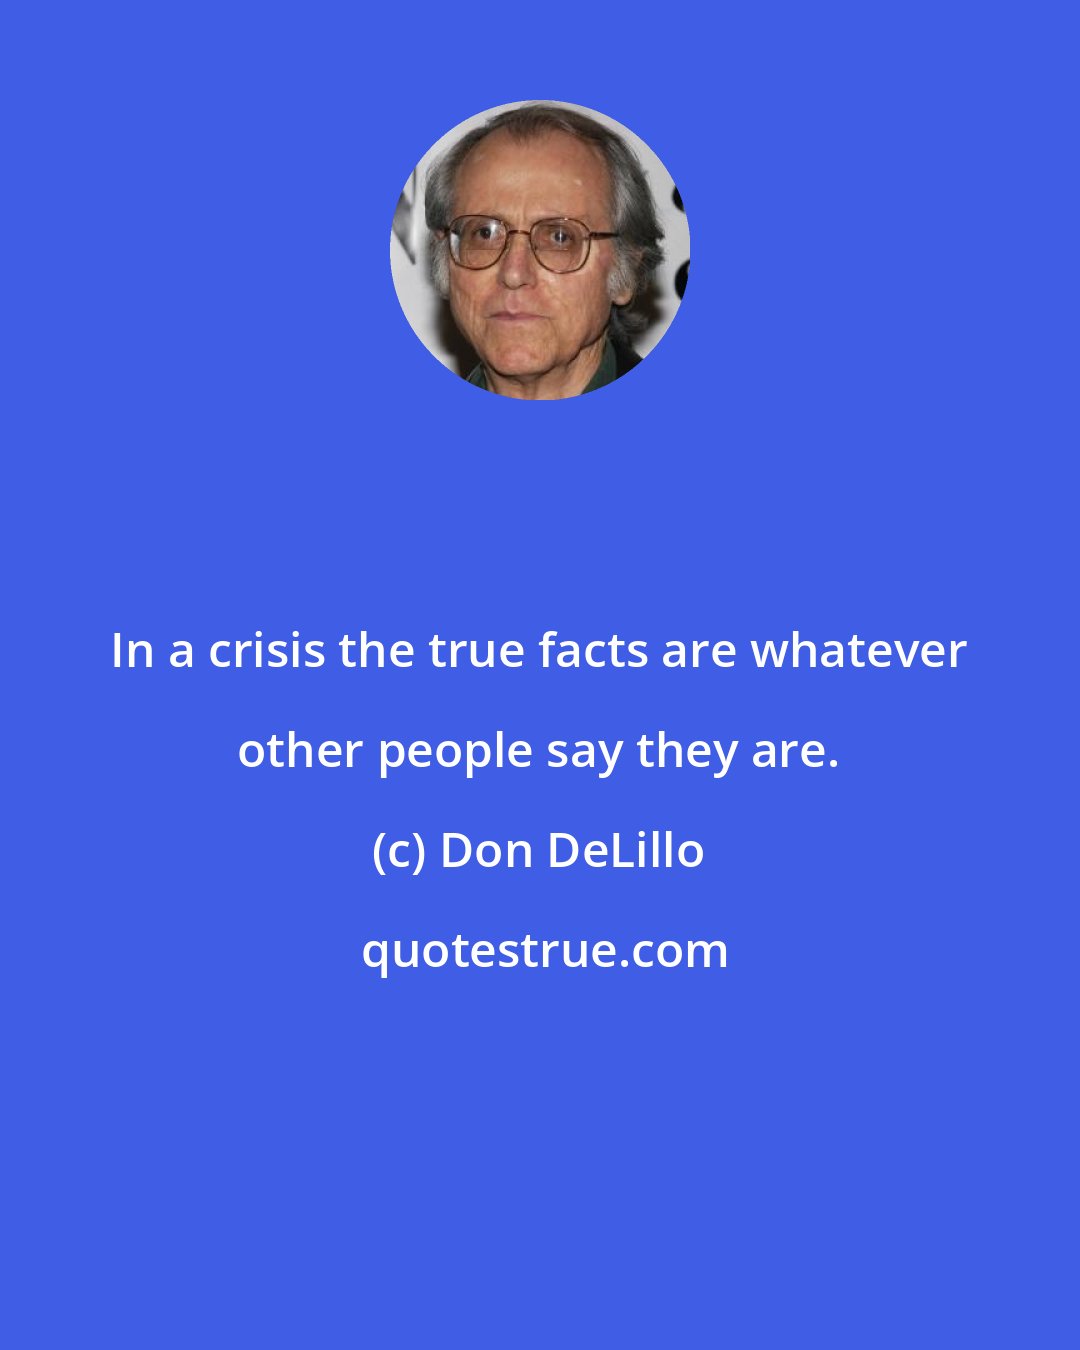 Don DeLillo: In a crisis the true facts are whatever other people say they are.